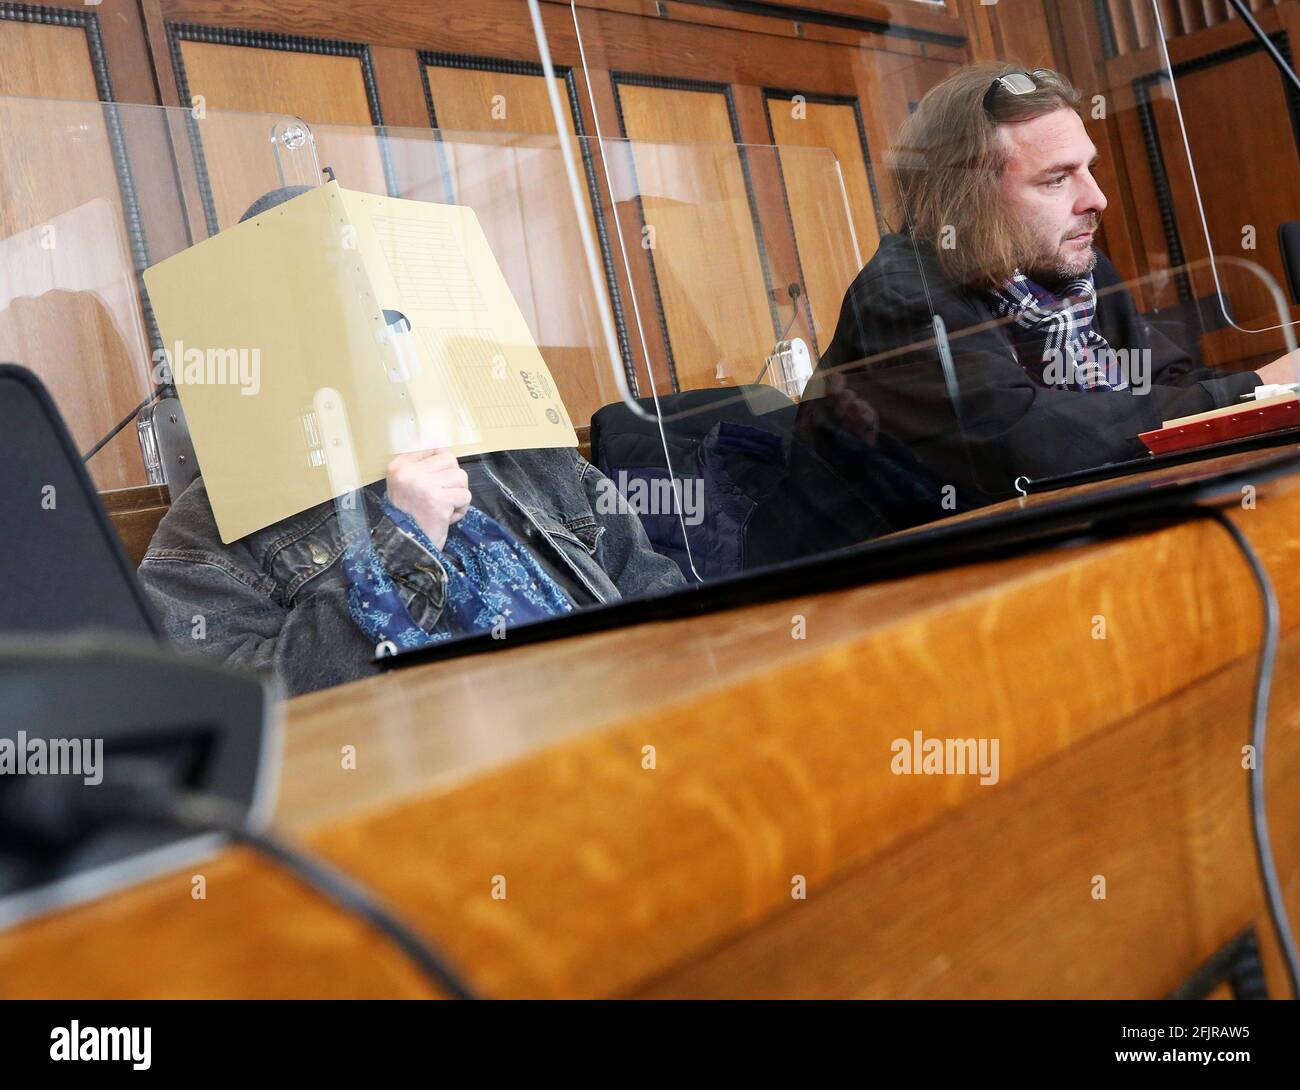 26 April 2021, North Rhine-Westphalia, Mönchengladbach: The accused nurse (l) waits in the courtroom with his lawyer Markus Kluck for his trial to begin. The 64-year-old is alleged to have killed a patient in orthopaedics with an overdose of sedatives in a hospital for people with special needs. Photo: Roland Weihrauch/dpa Stock Photo